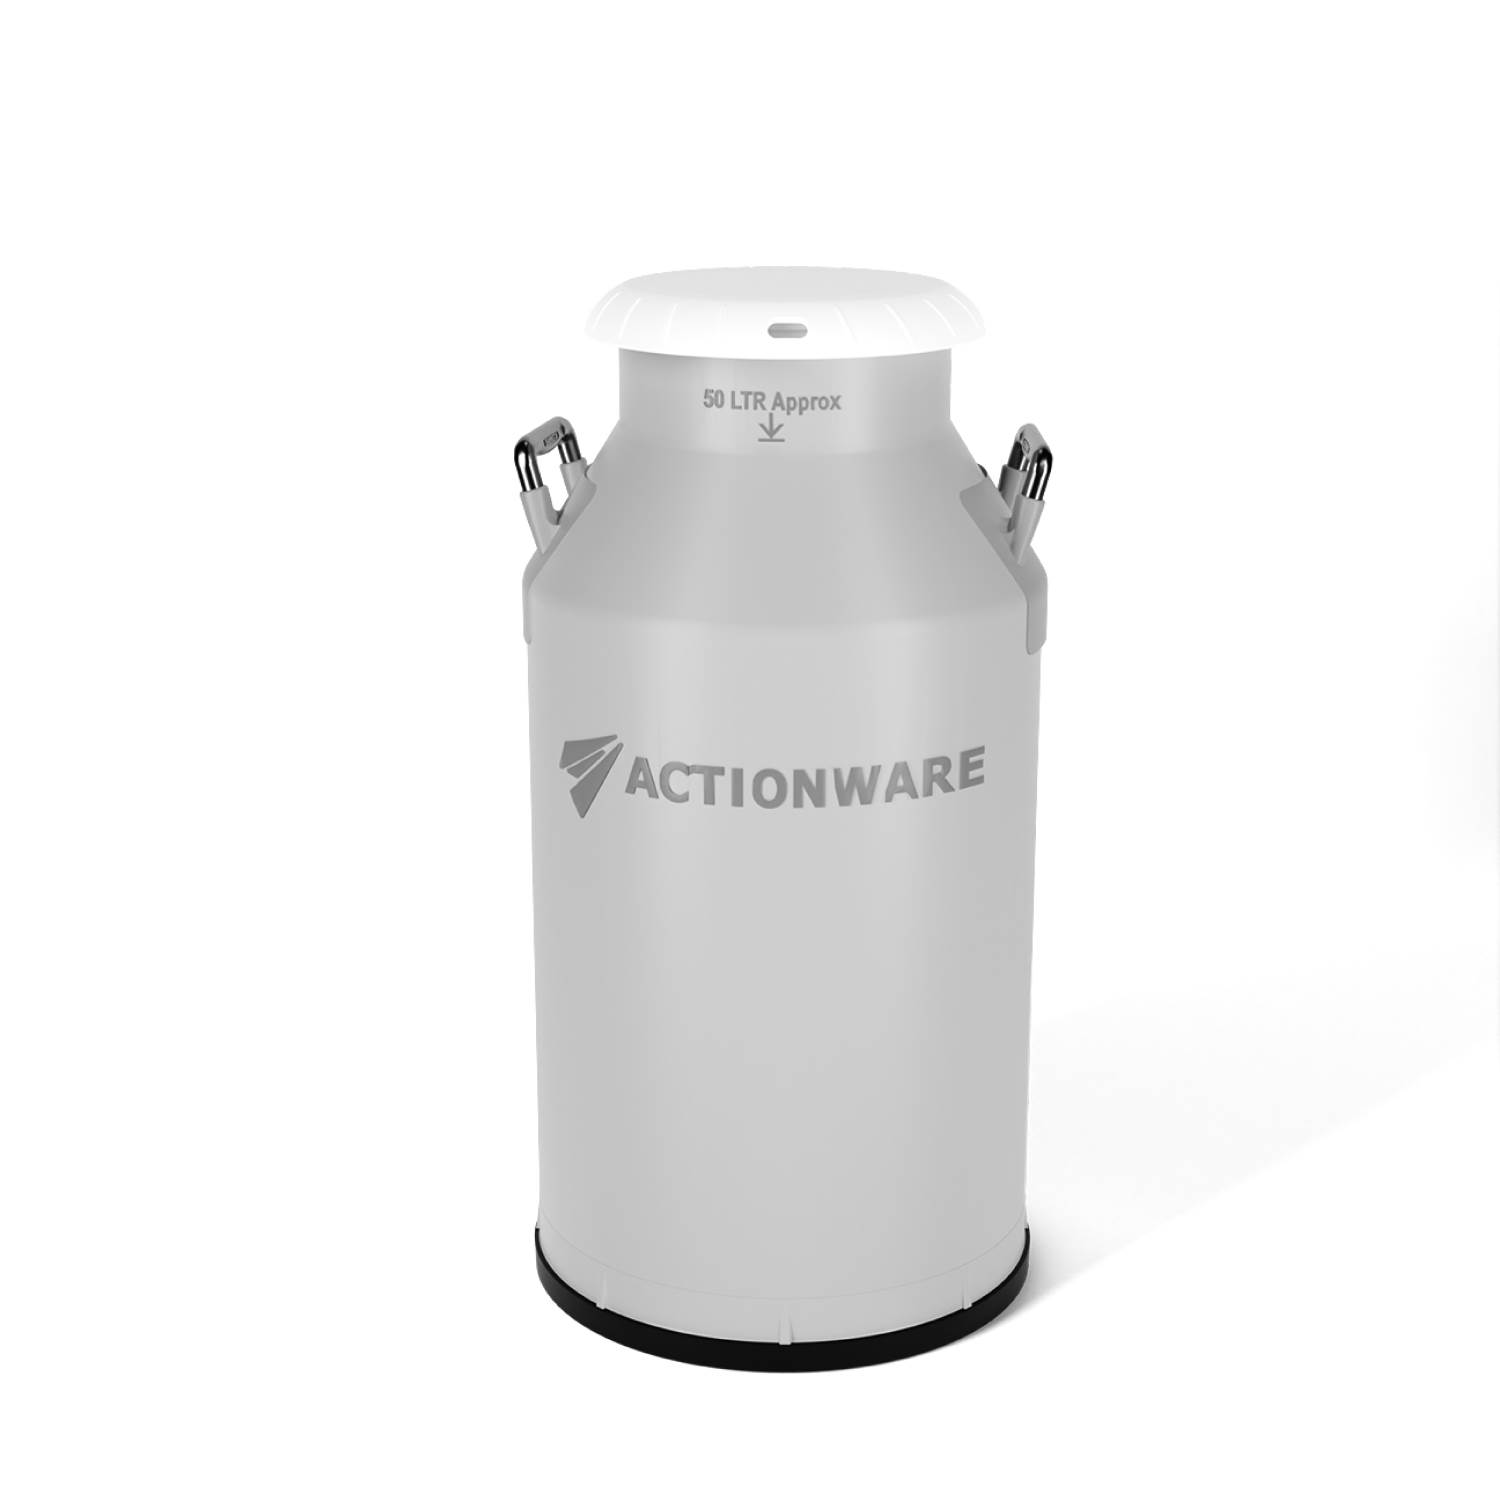 Actionware Plastic Milk Can 50Ltr - Greay - 50 Liter